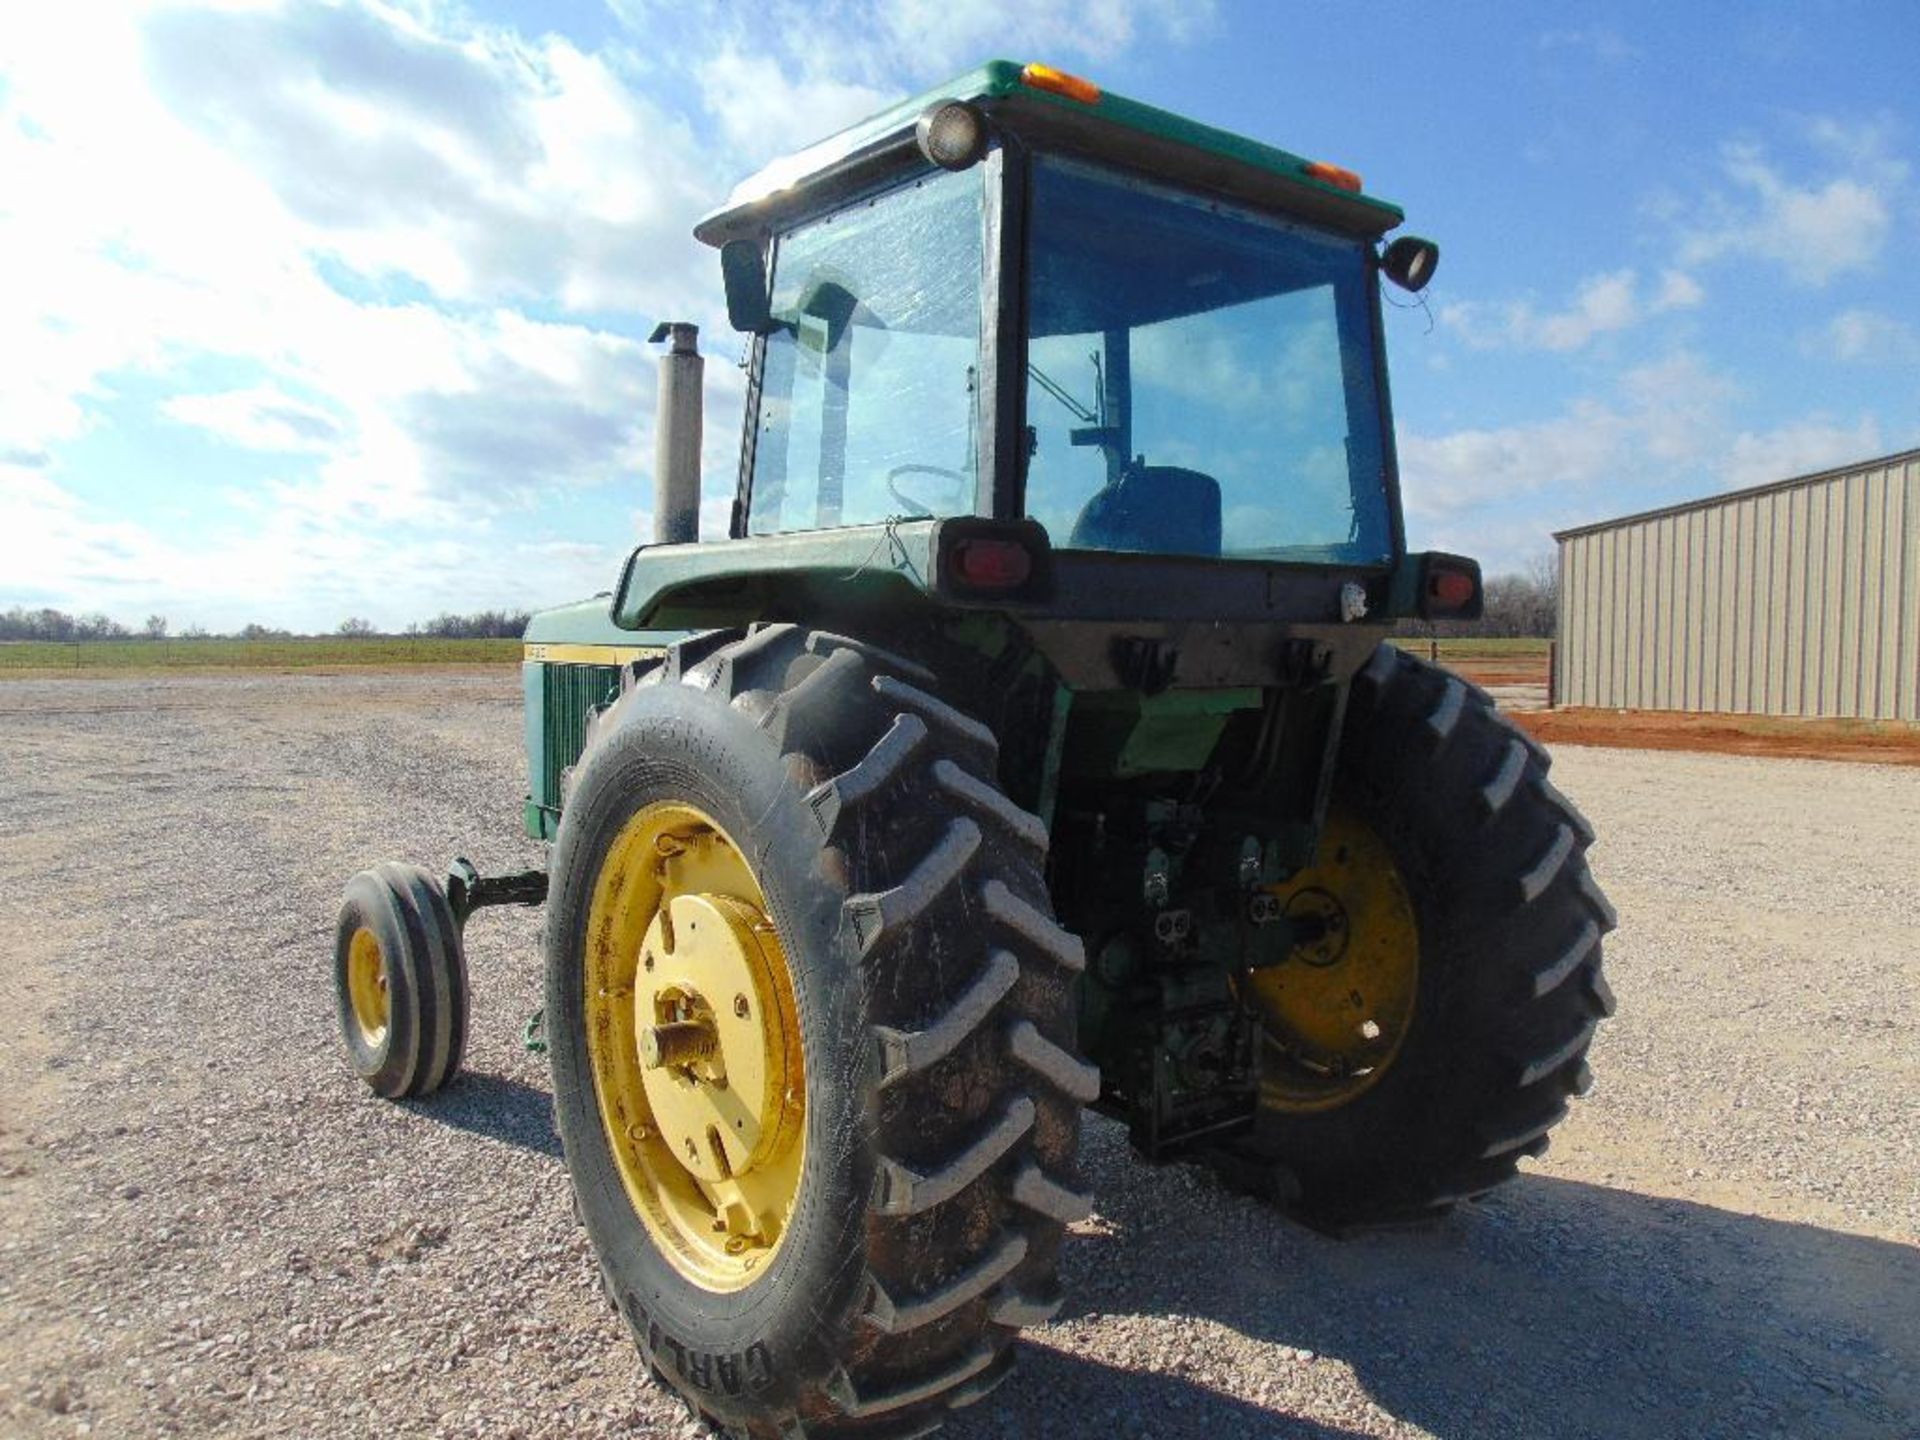 John Deere 4430 Farm Tractor, s/n 048022r, cab, a/c, 3pt, pto, hour meter reads 2960 hrs, - Image 8 of 10